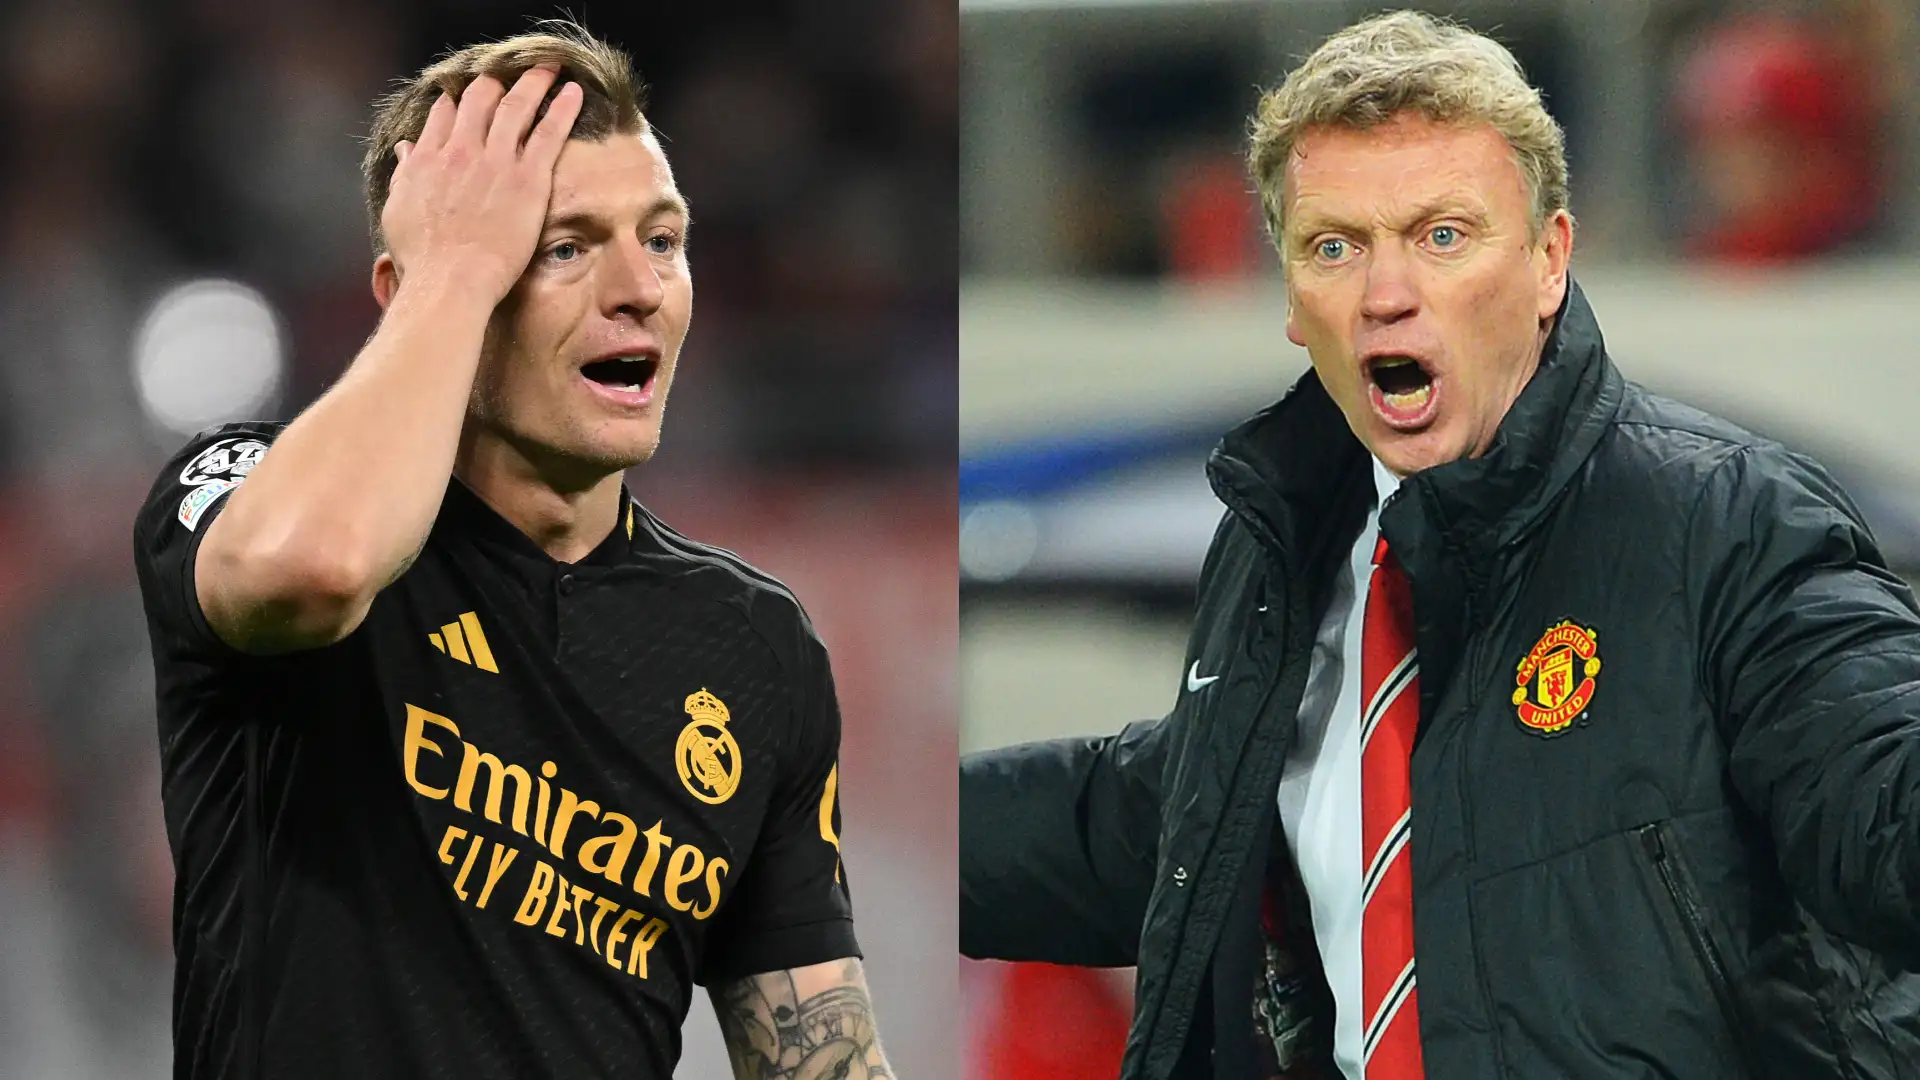 Revealed: How Toni Kroos' Man Utd move collapsed due to David Moyes' sacking despite contract being 'basically done' as Real Madrid legend announces retirement